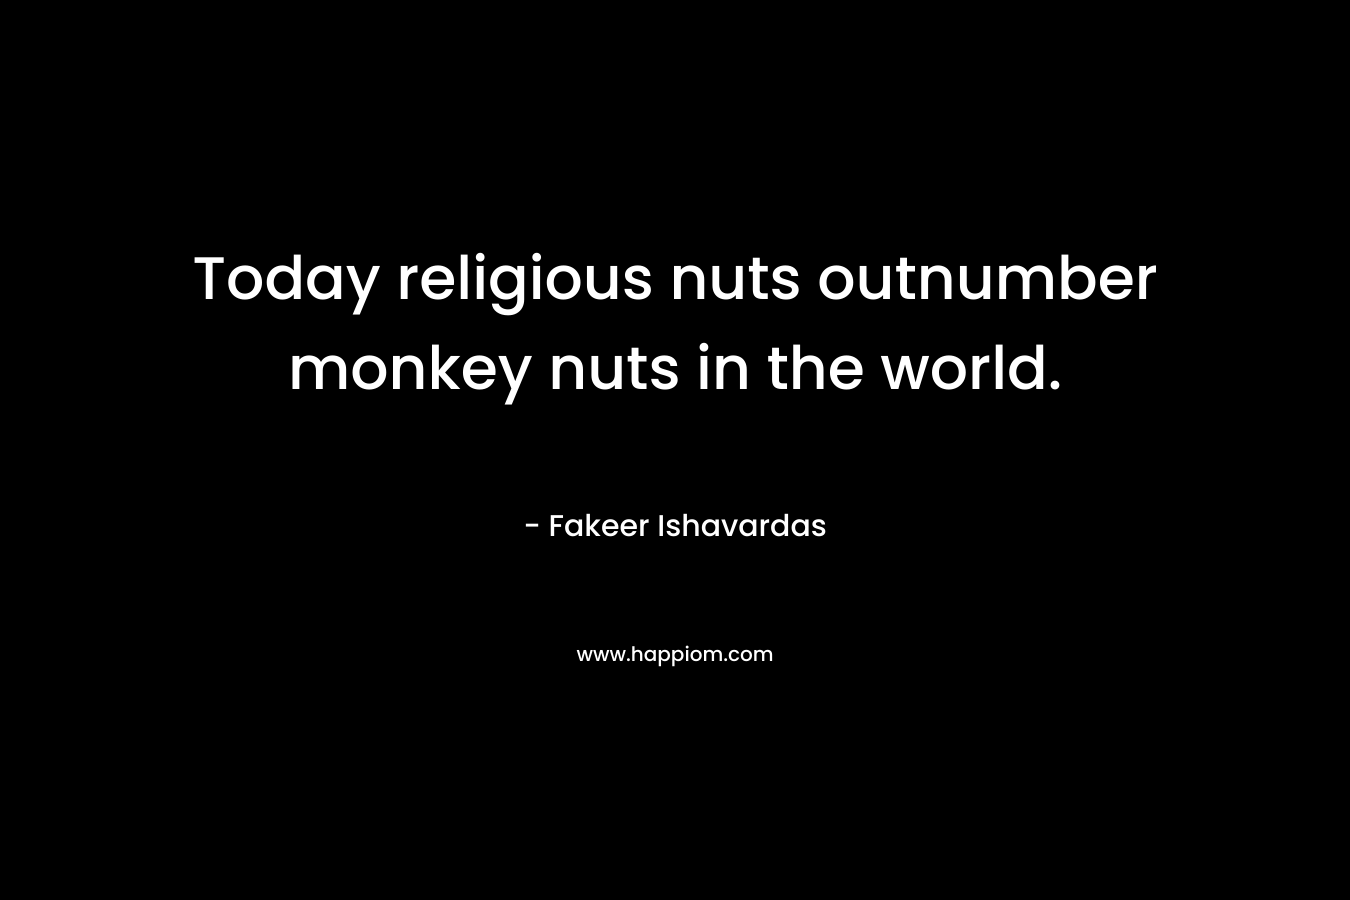 Today religious nuts outnumber monkey nuts in the world. – Fakeer Ishavardas